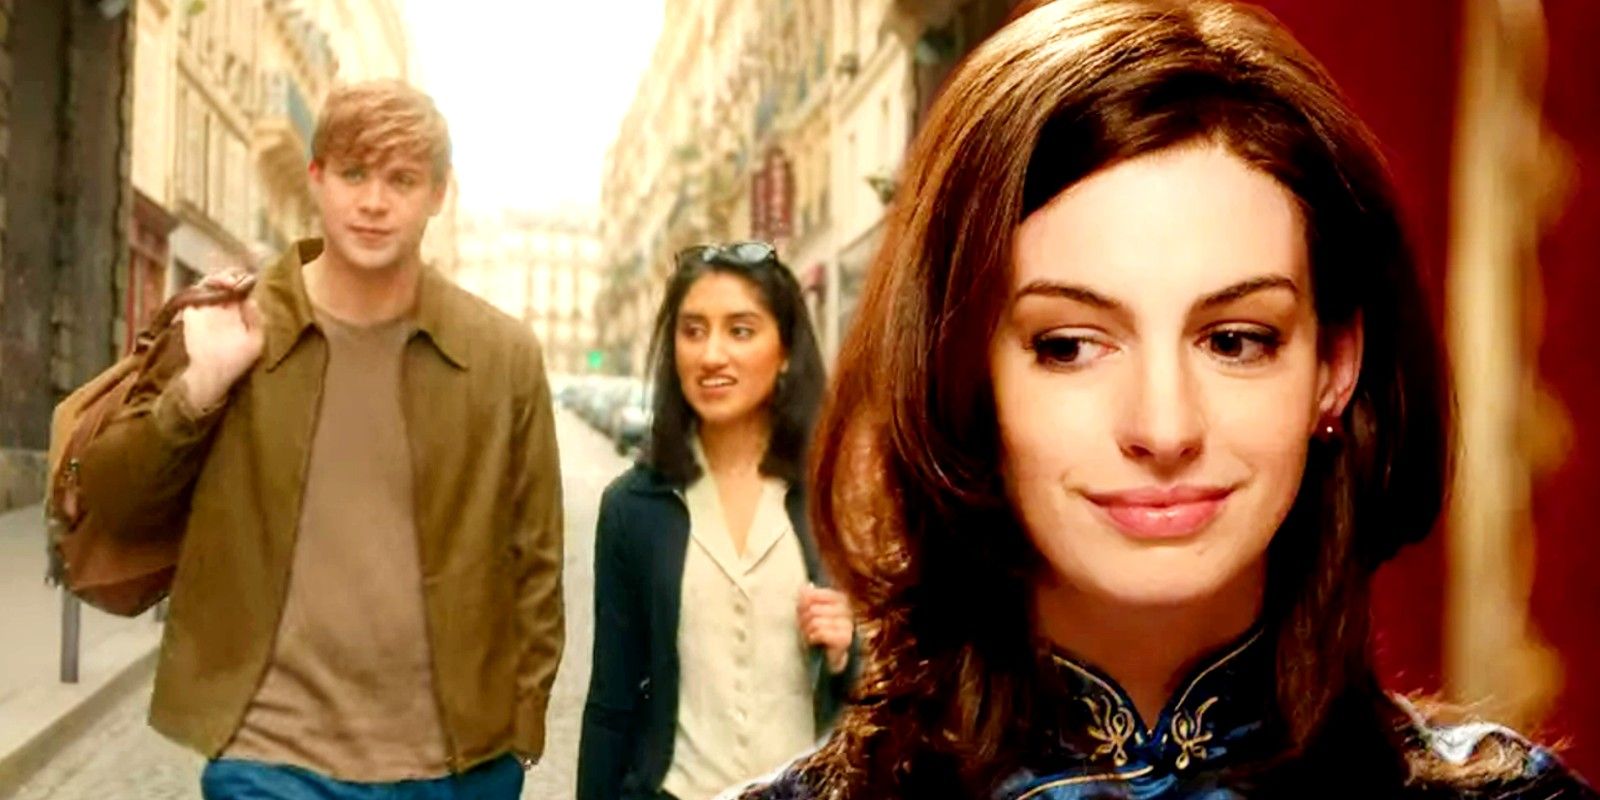 One Day characters walking on the Paris streets and Anne Hathaway in the movie version smiling